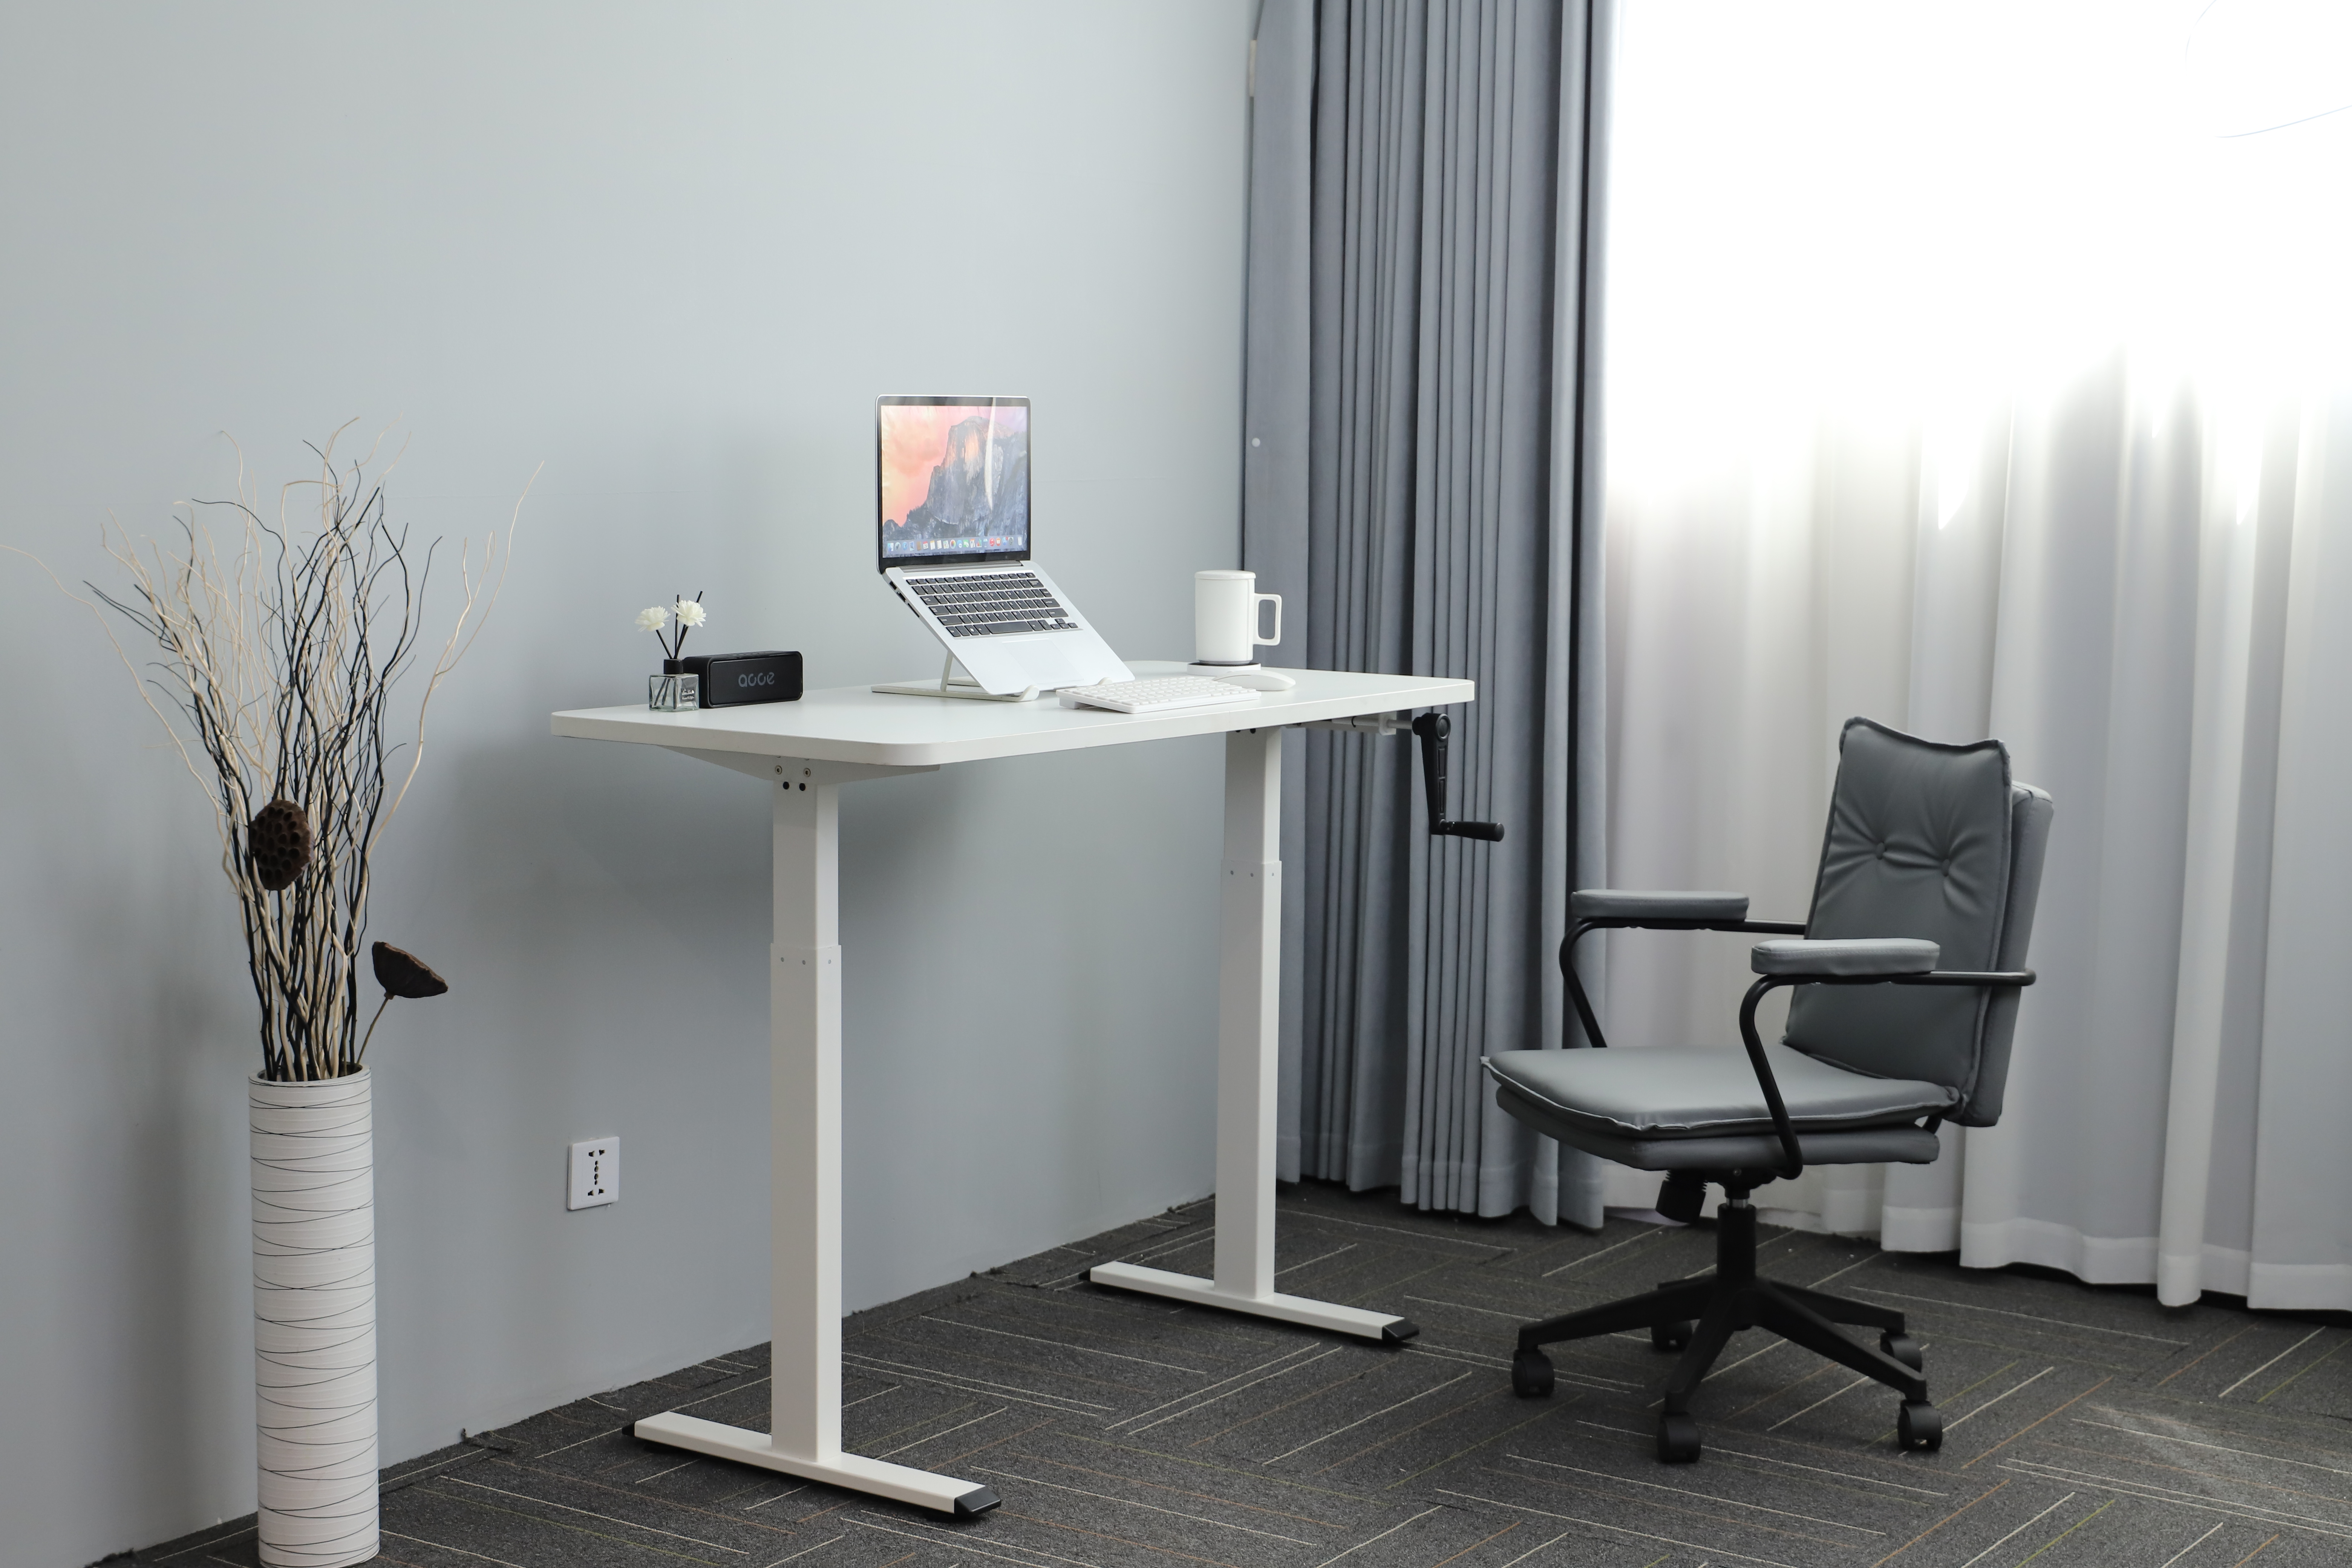 Why choose the Sit and Standing Desk?